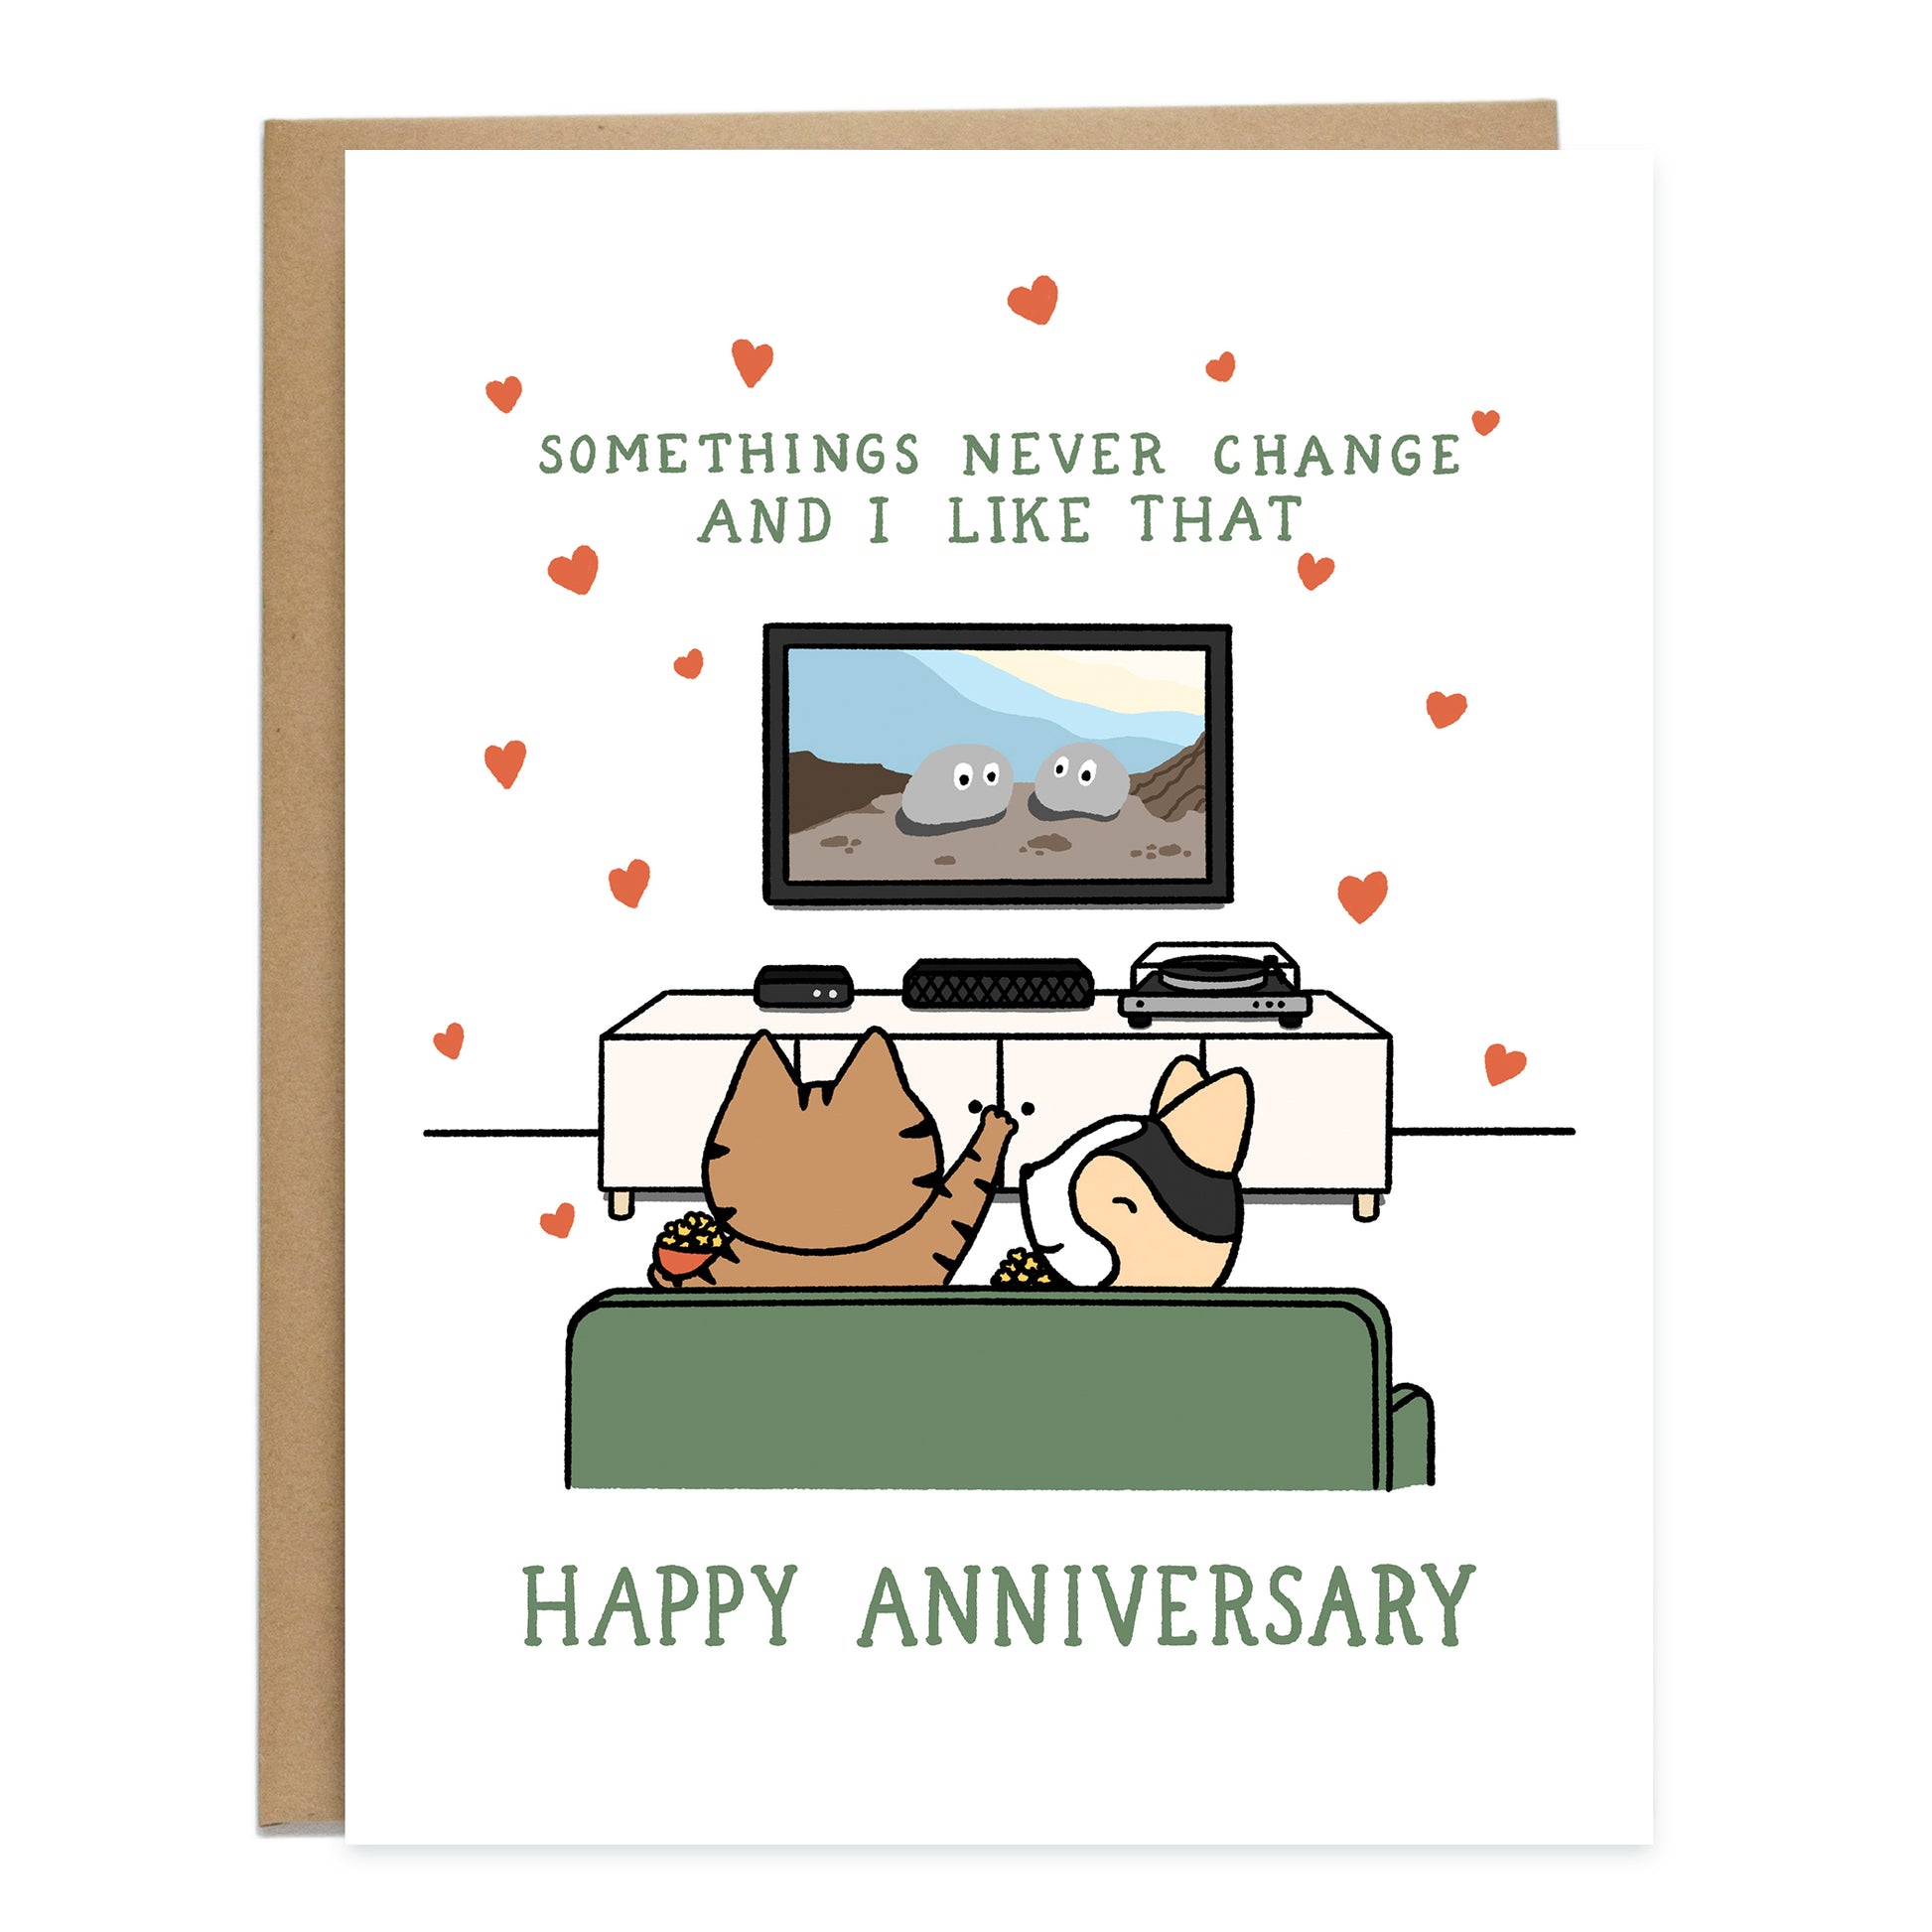 A card with a drawing of a cat and corgi at home watching a movie on the tv on their green couch, eating popcorn. The cat is pointing at the tv, with the movie EEAAO playing. The card reads, somethings never change and I like that, happy anniversary